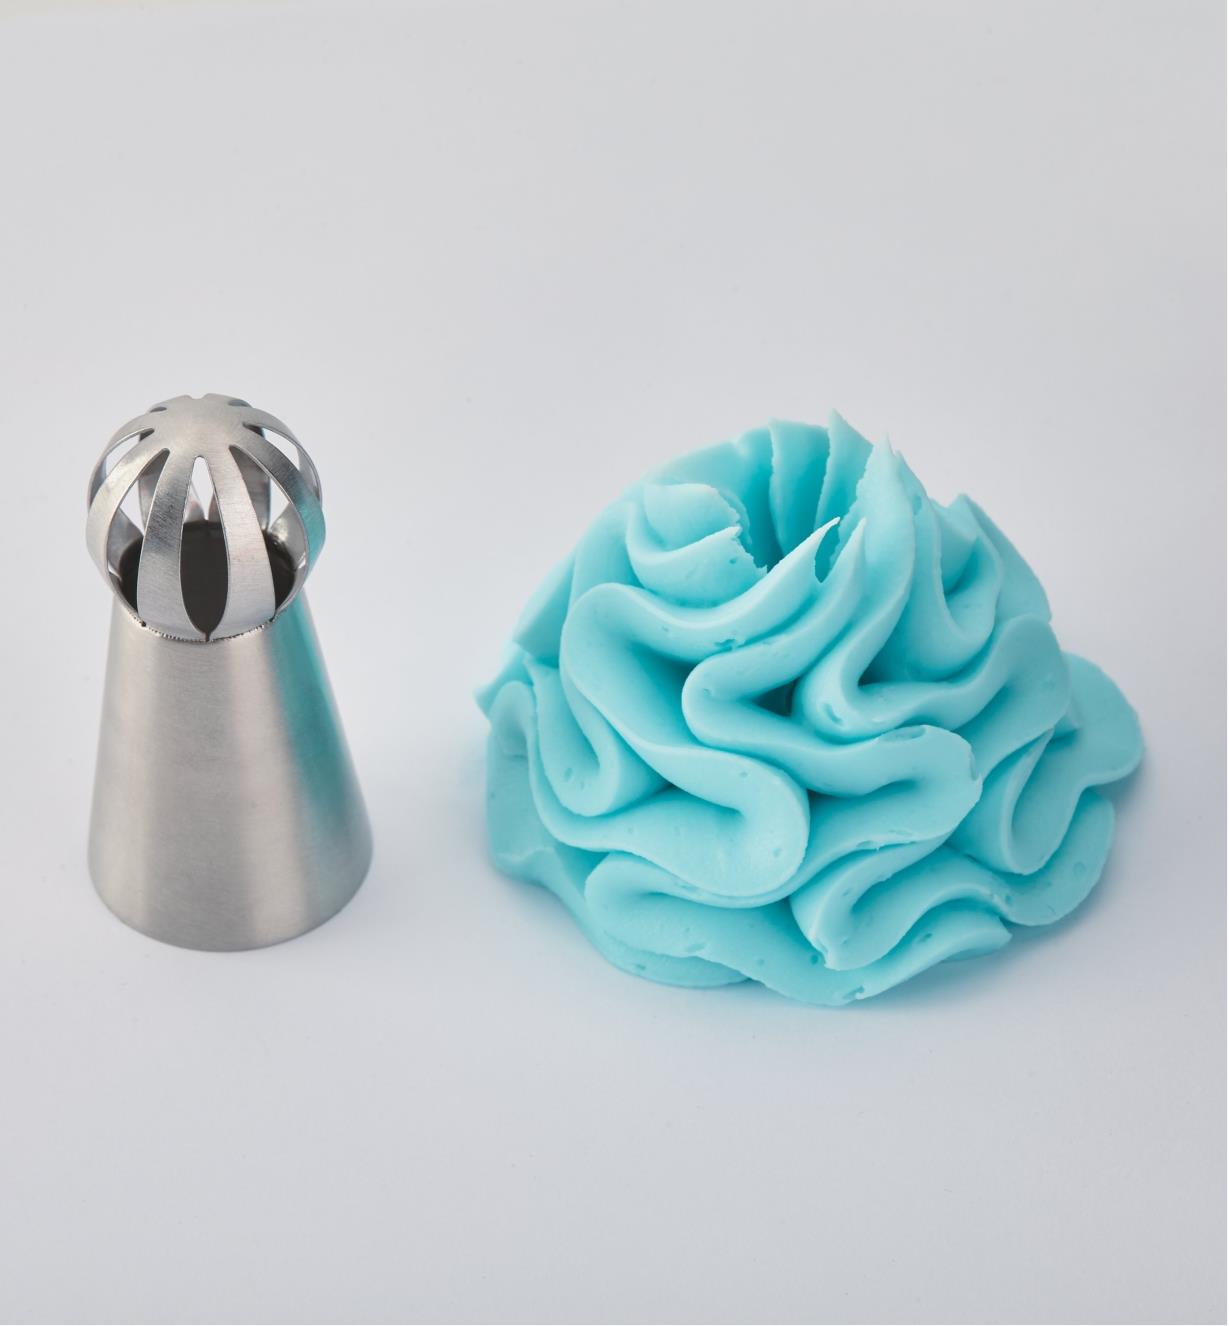 Ball Piping Tip #1 next to an example of a flower design made with it